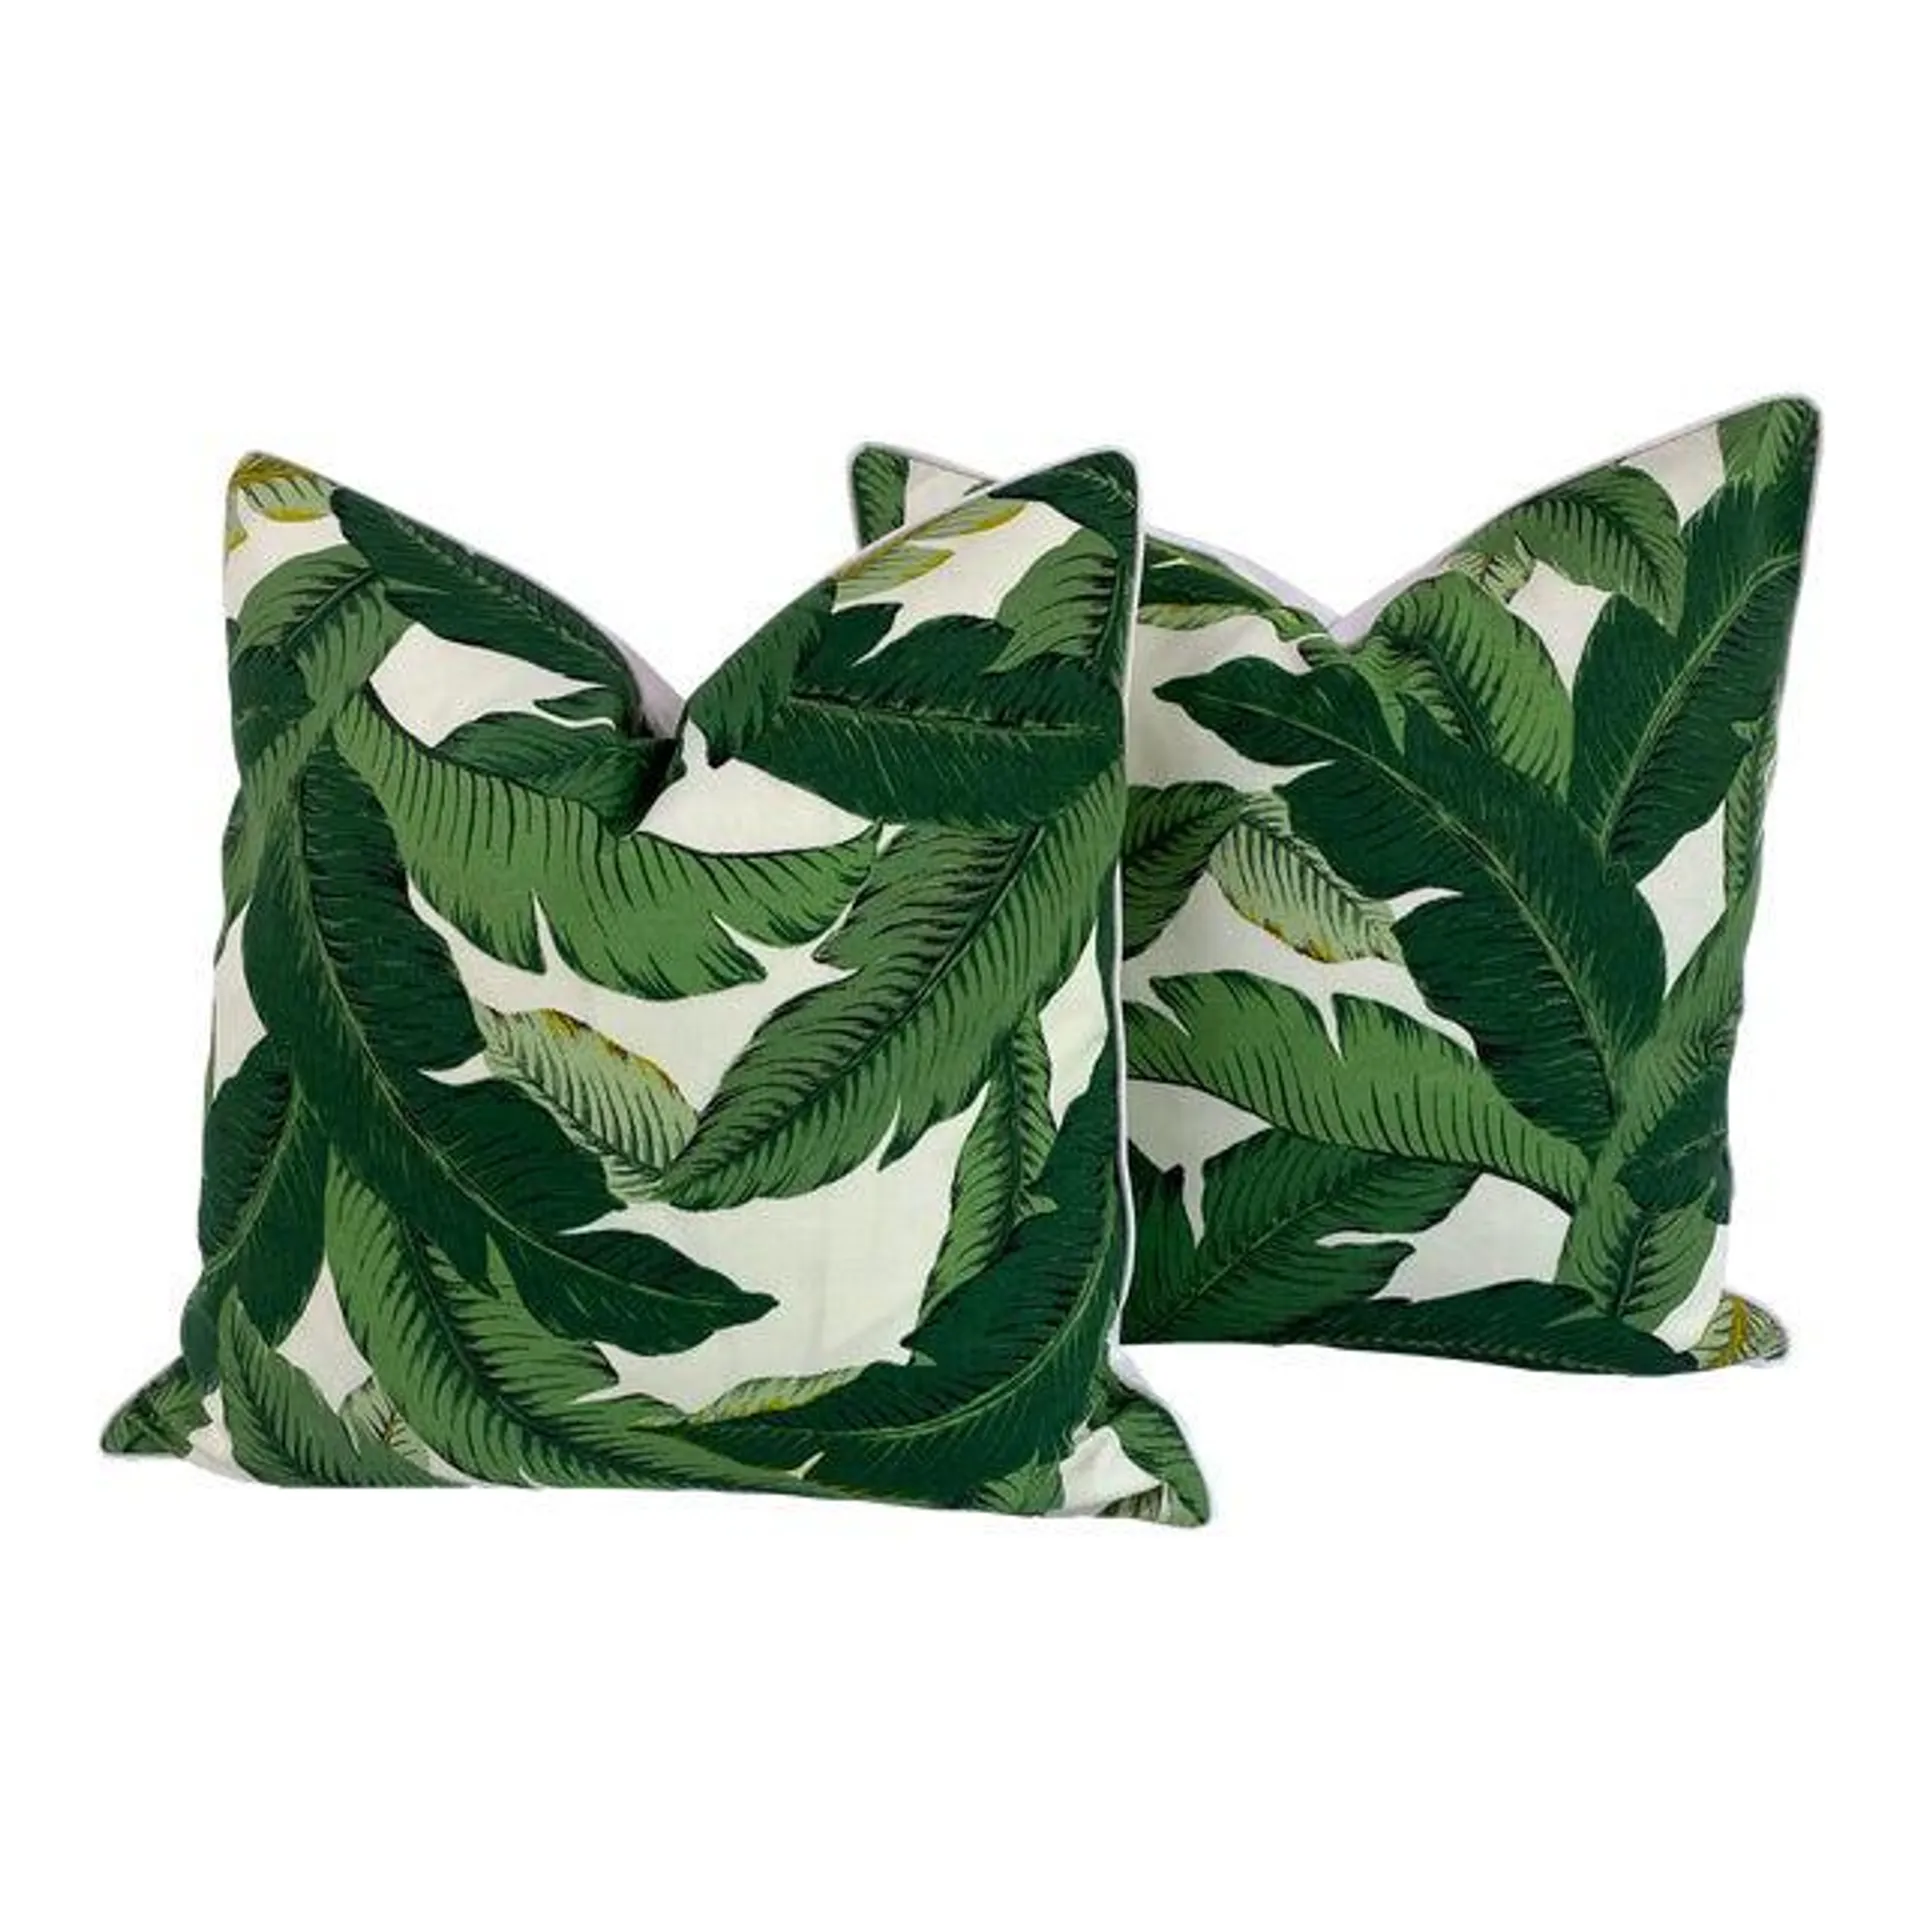 Tommy Bahama Banana Leaf Indoor/Outdoor Pillows - Set of 2